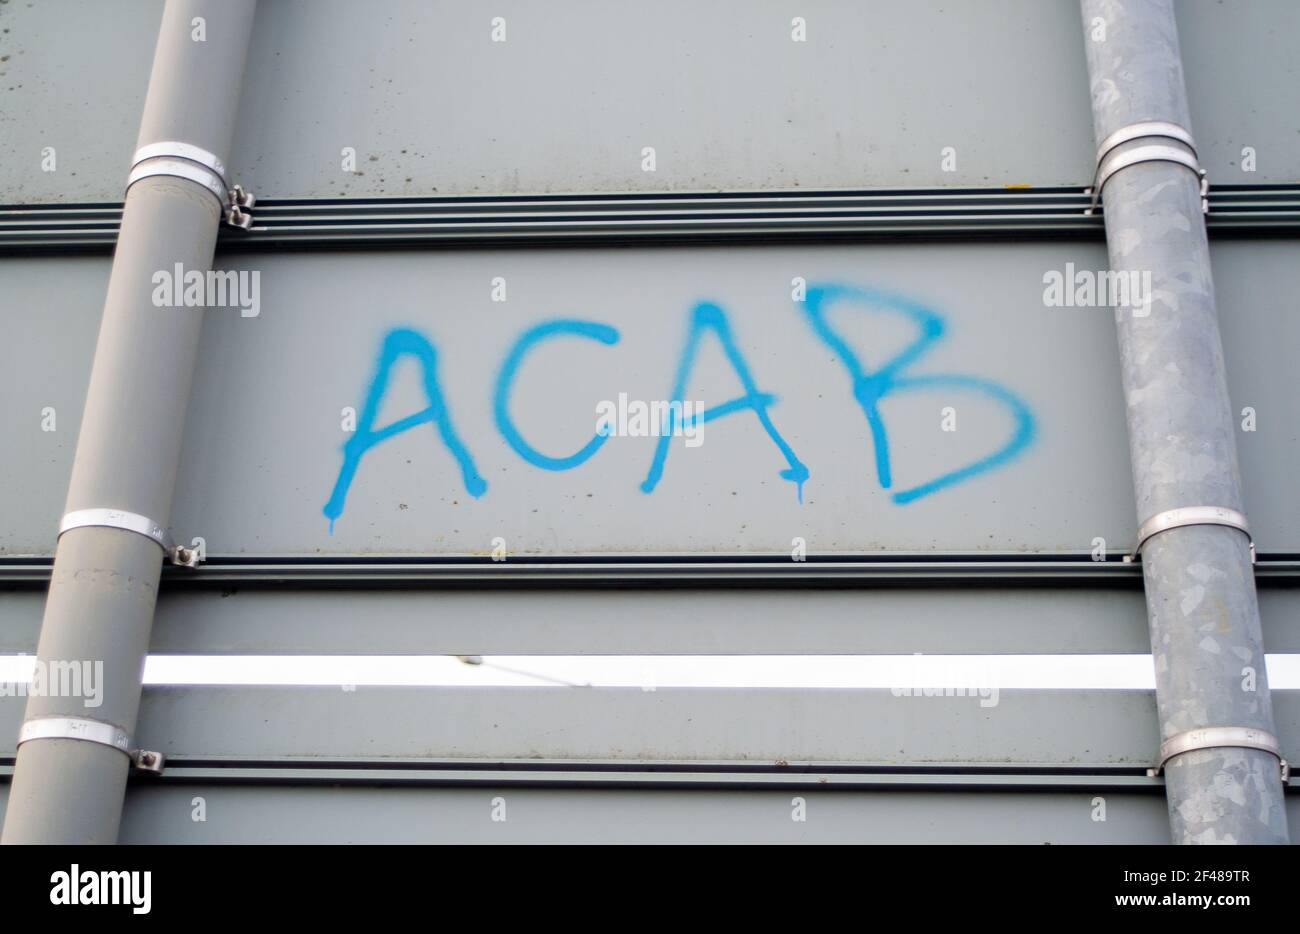 Aylesbury, UK. 15th March, 2021. All Cops Are Bastards ACAB graffiti on signs near the Spinney where HS2 Ltd have felled most of the trees in there om Small Dean Lane near Wendover, Aylesbury as well as a beautiful hazel coppice. Local residents are heart broken to see the destruction that HS2 is causing around Wendover and Aylesbury. High Speed Rail 2 are carving a huge scar across the Chilterns which is an AONB for the controversial rail link from London to Birmingham. . Credit: Maureen McLean/Alamy Stock Photo